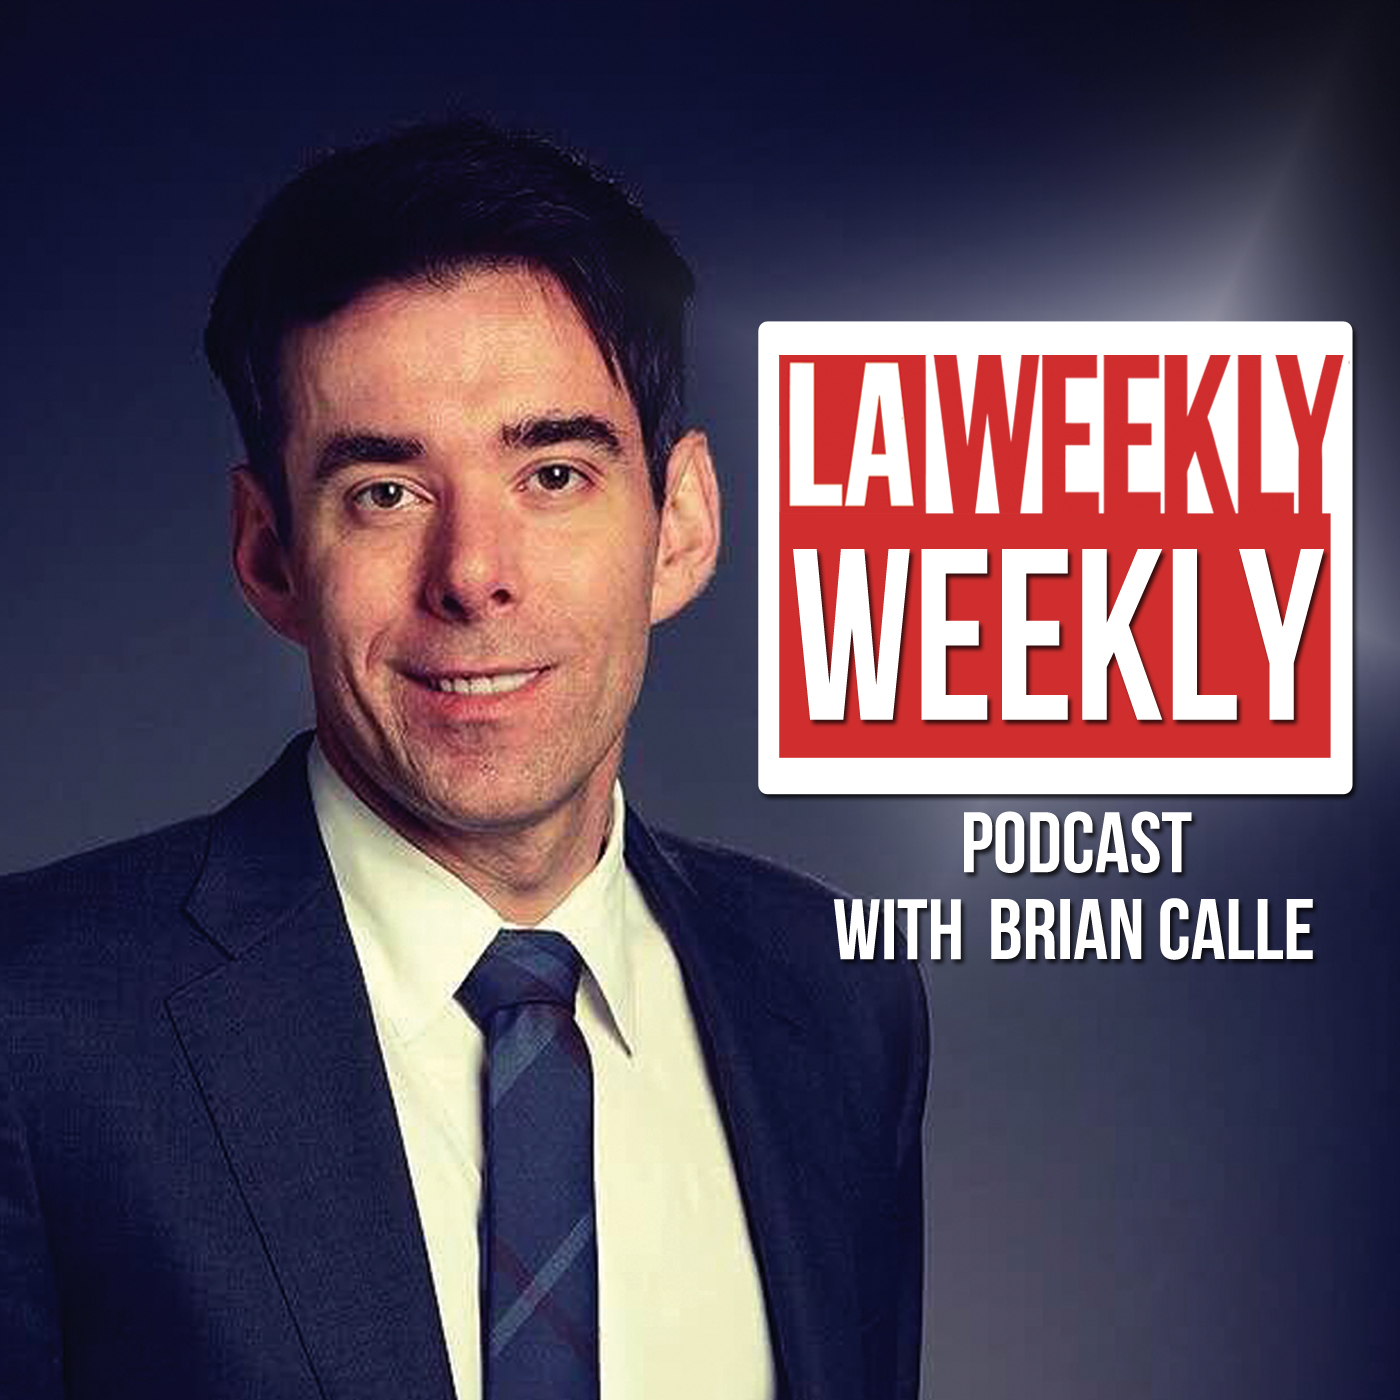 LA Weekly Weekly Podcast: Adam Carolla Stresses Importance of Freedom of Speech on the L.A. Weekly Weekly Podcast